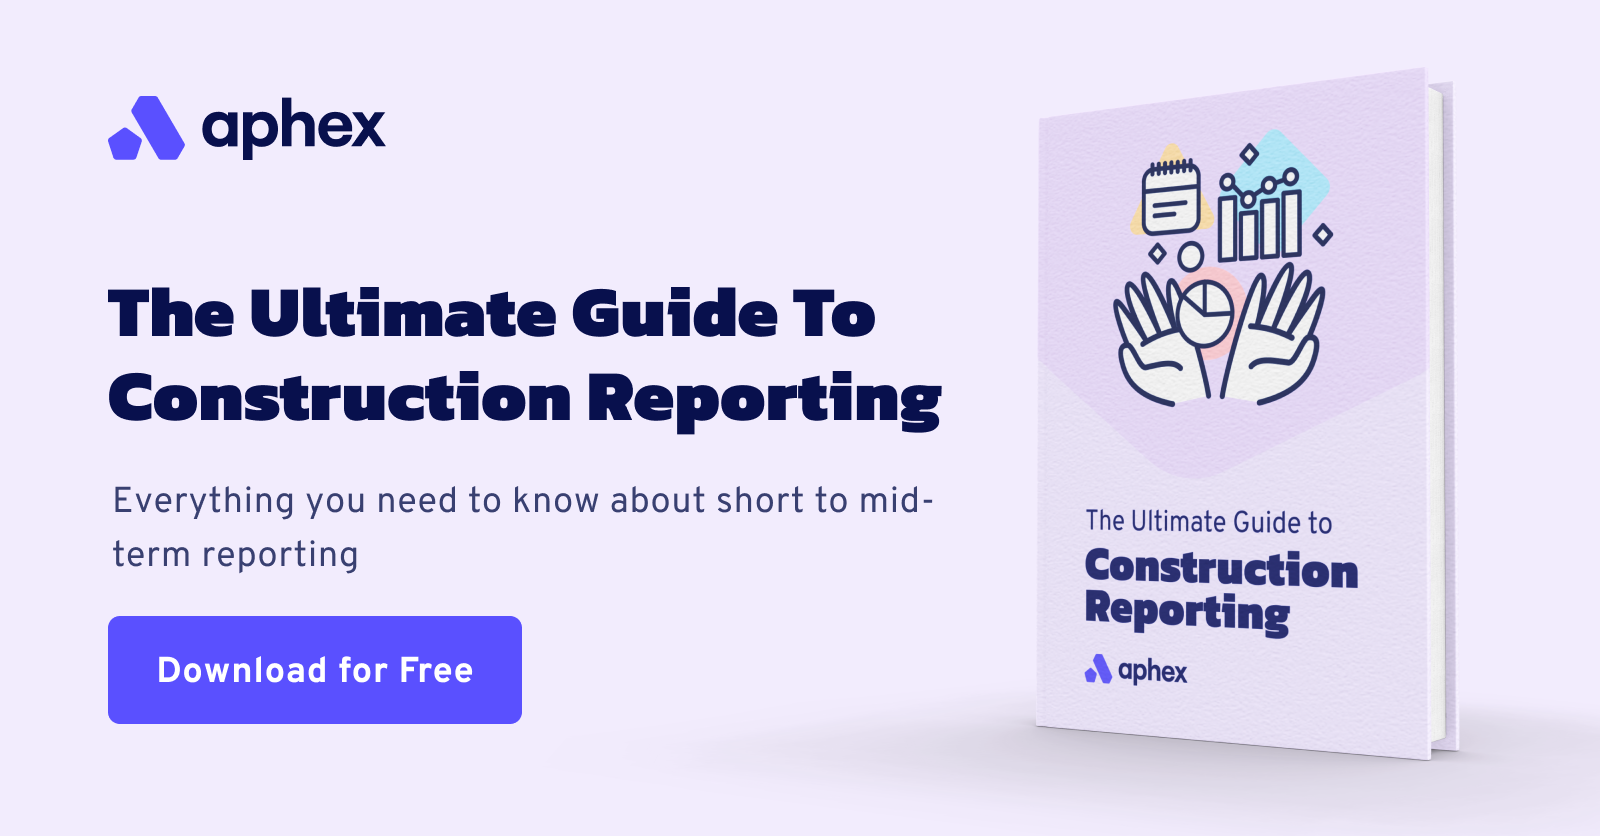 The Ultimate Guide To Construction Reporting Resource-1